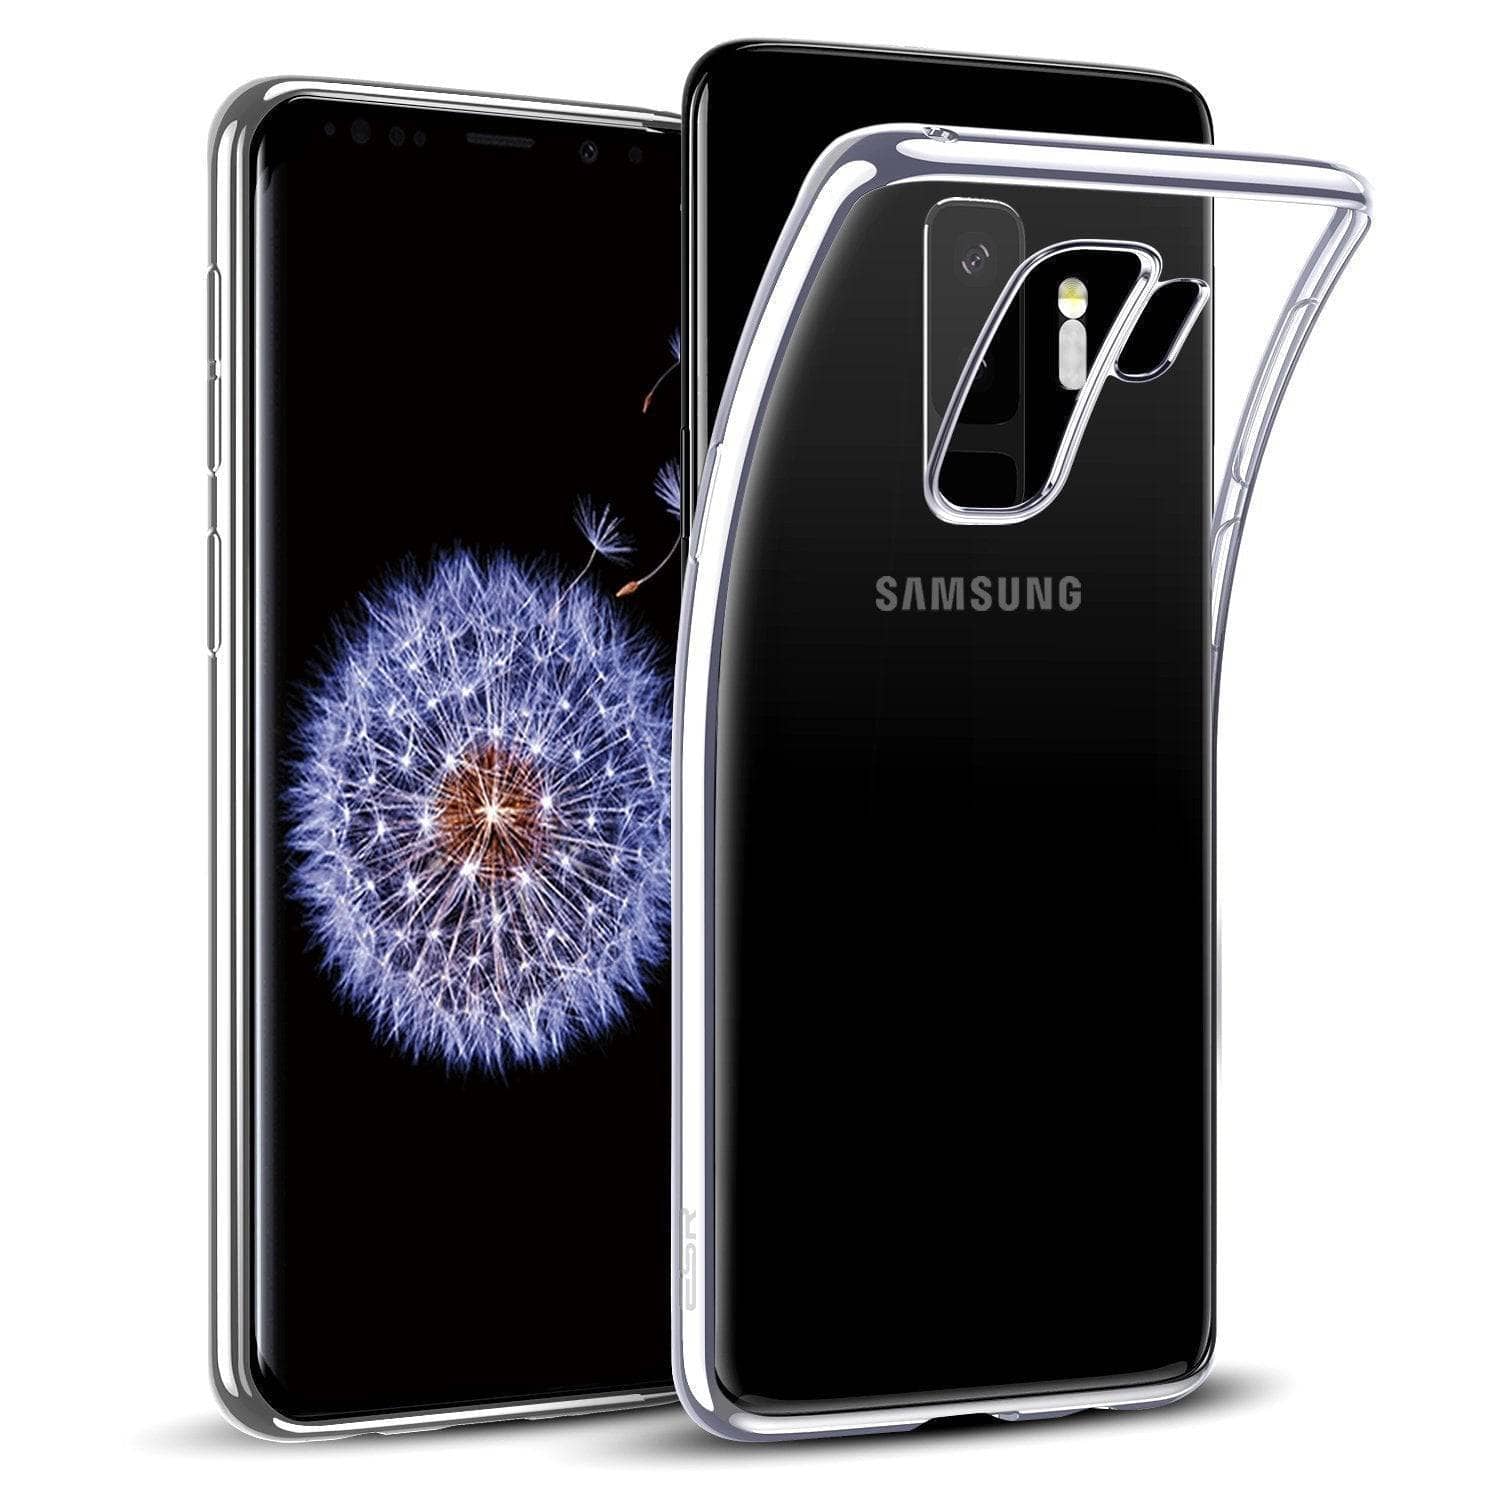 Clear Rubber Back Case for Samsung Galaxy Note 9 S9+ S8 S7 Edge J5 Pro Skin Slim-Phone Case Clear Rubber-Generic-www.PhoneGuy.com.au